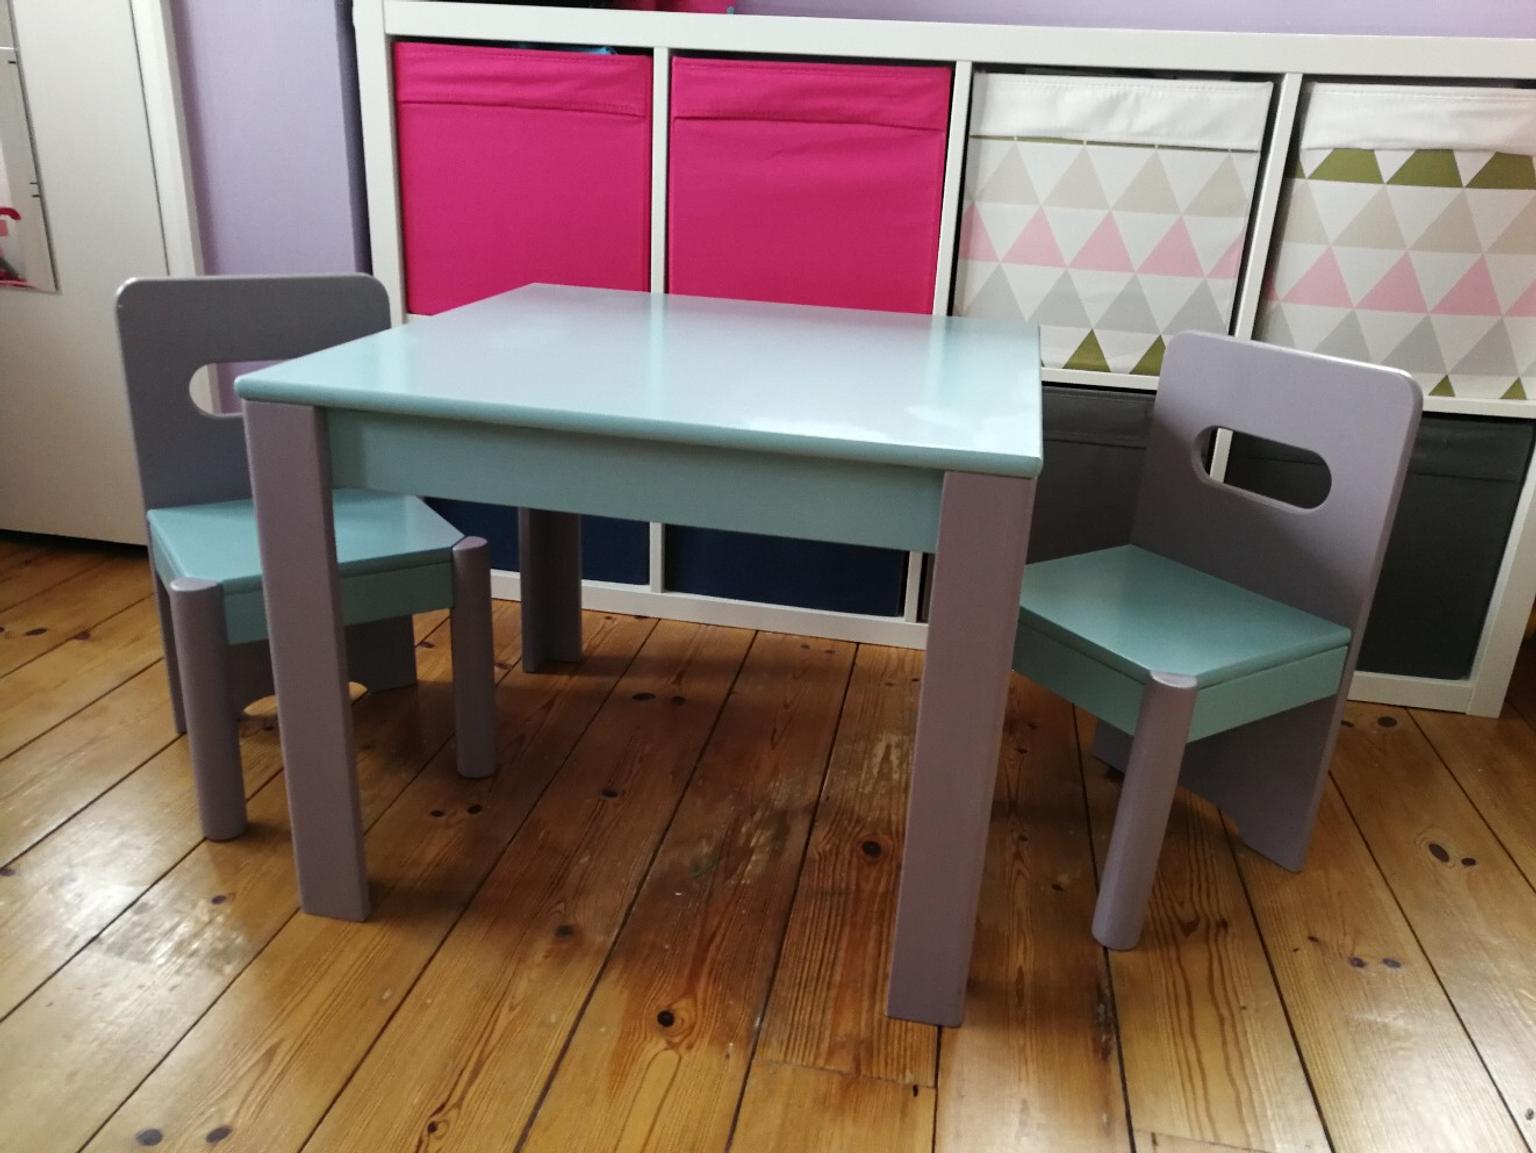 John Lewis Wood Children Table And Chairs In Nw4 Londyn Fur 40 00